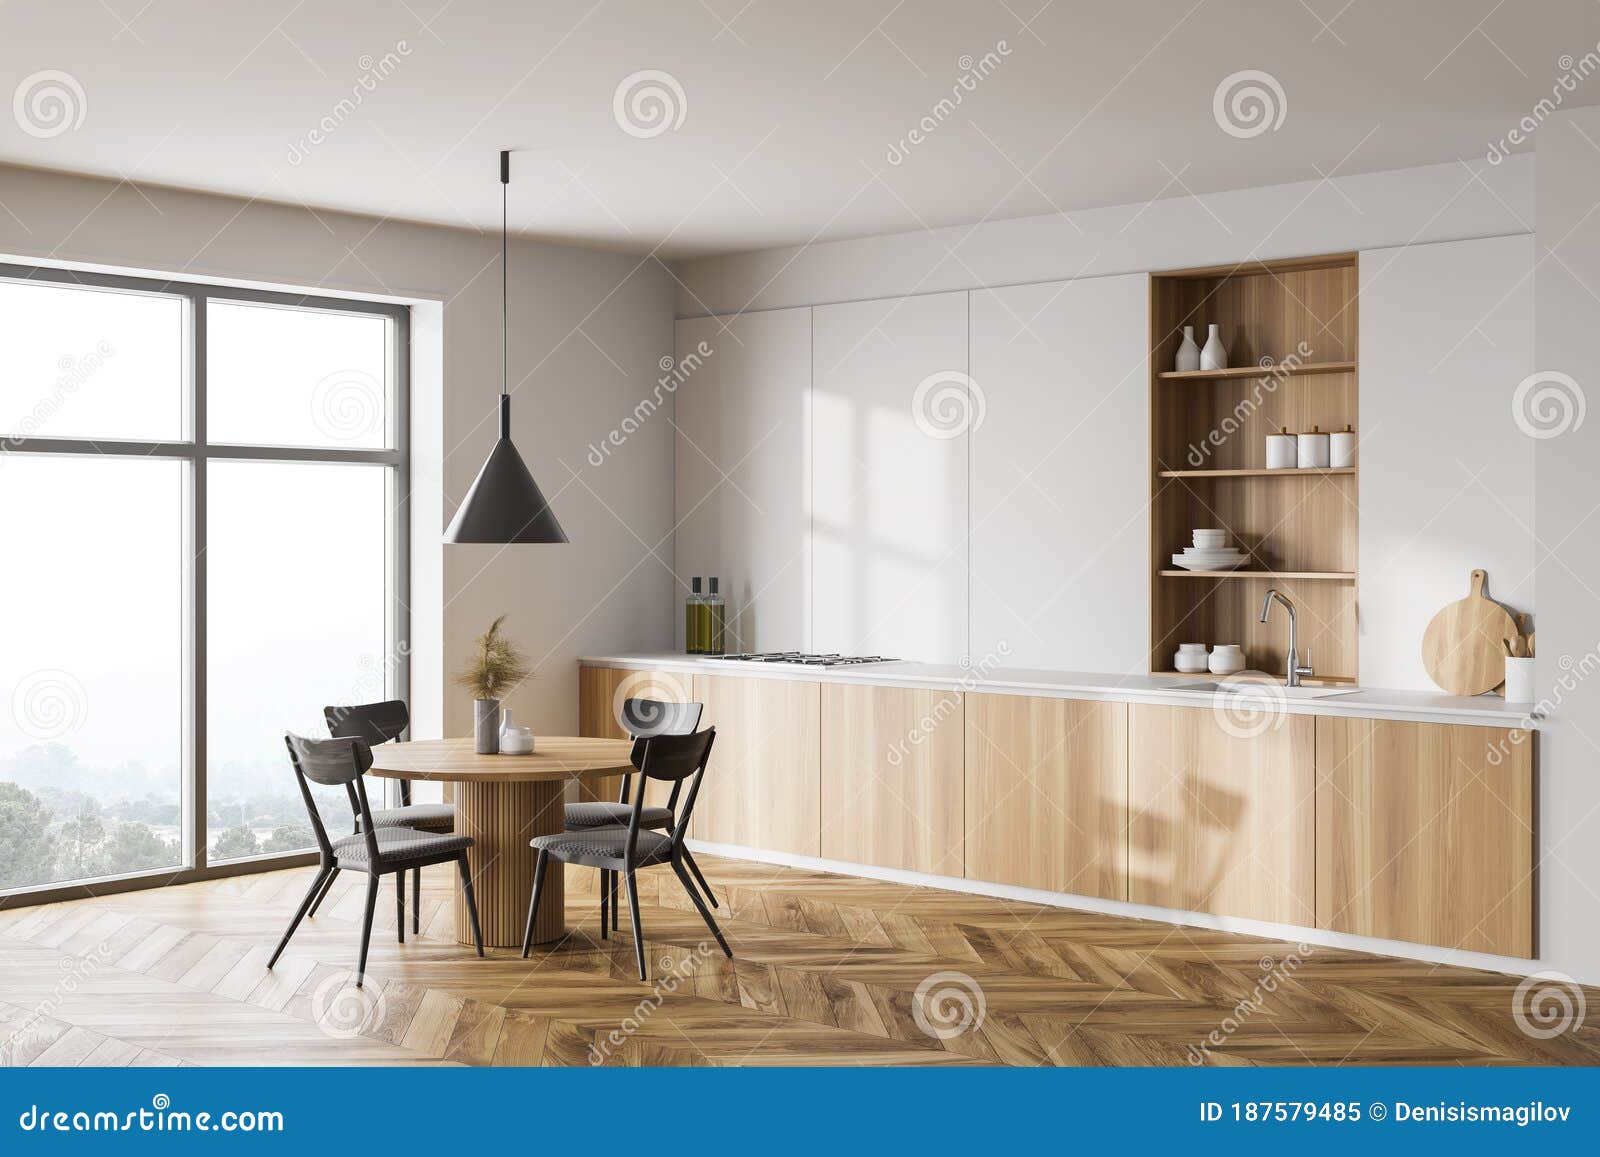 White And Wooden Kitchen Corner With Dining Table Stock Illustration Illustration Of Neat